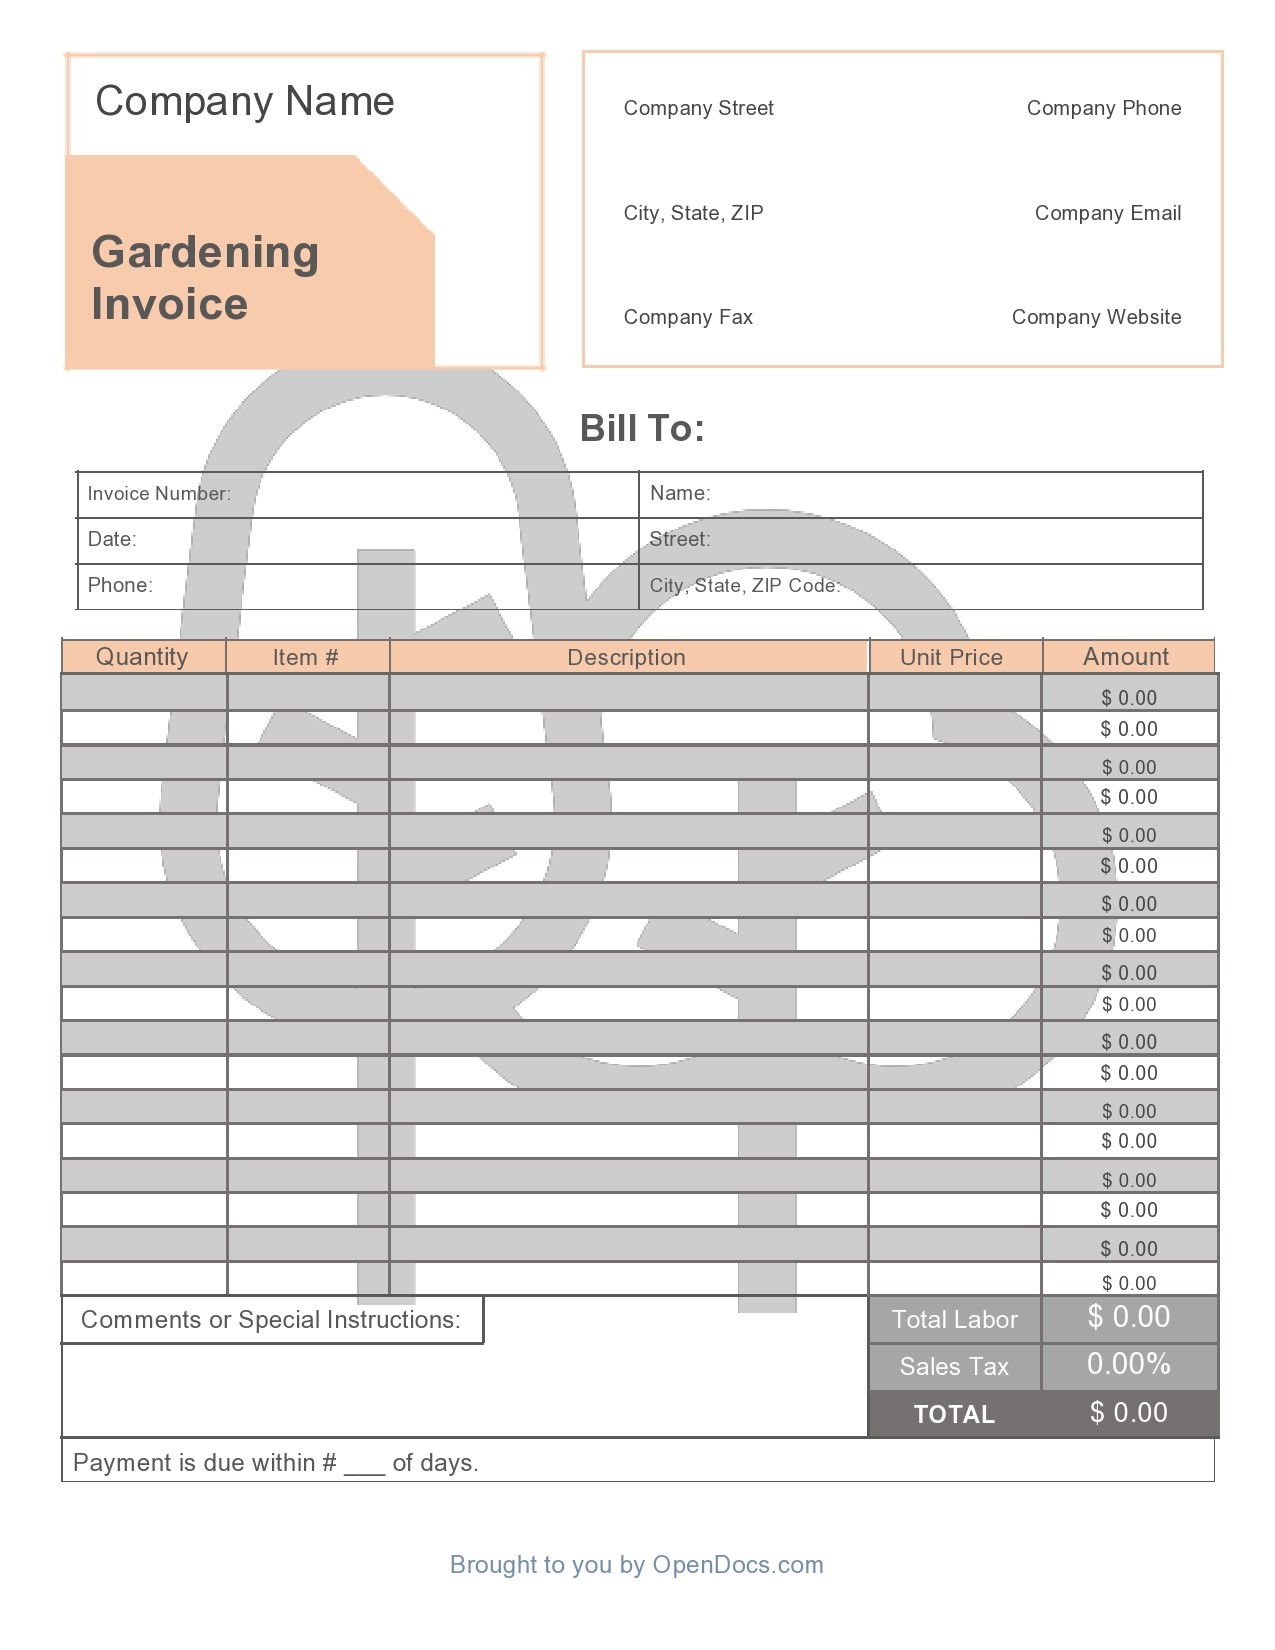 Free landscaping invoice 36